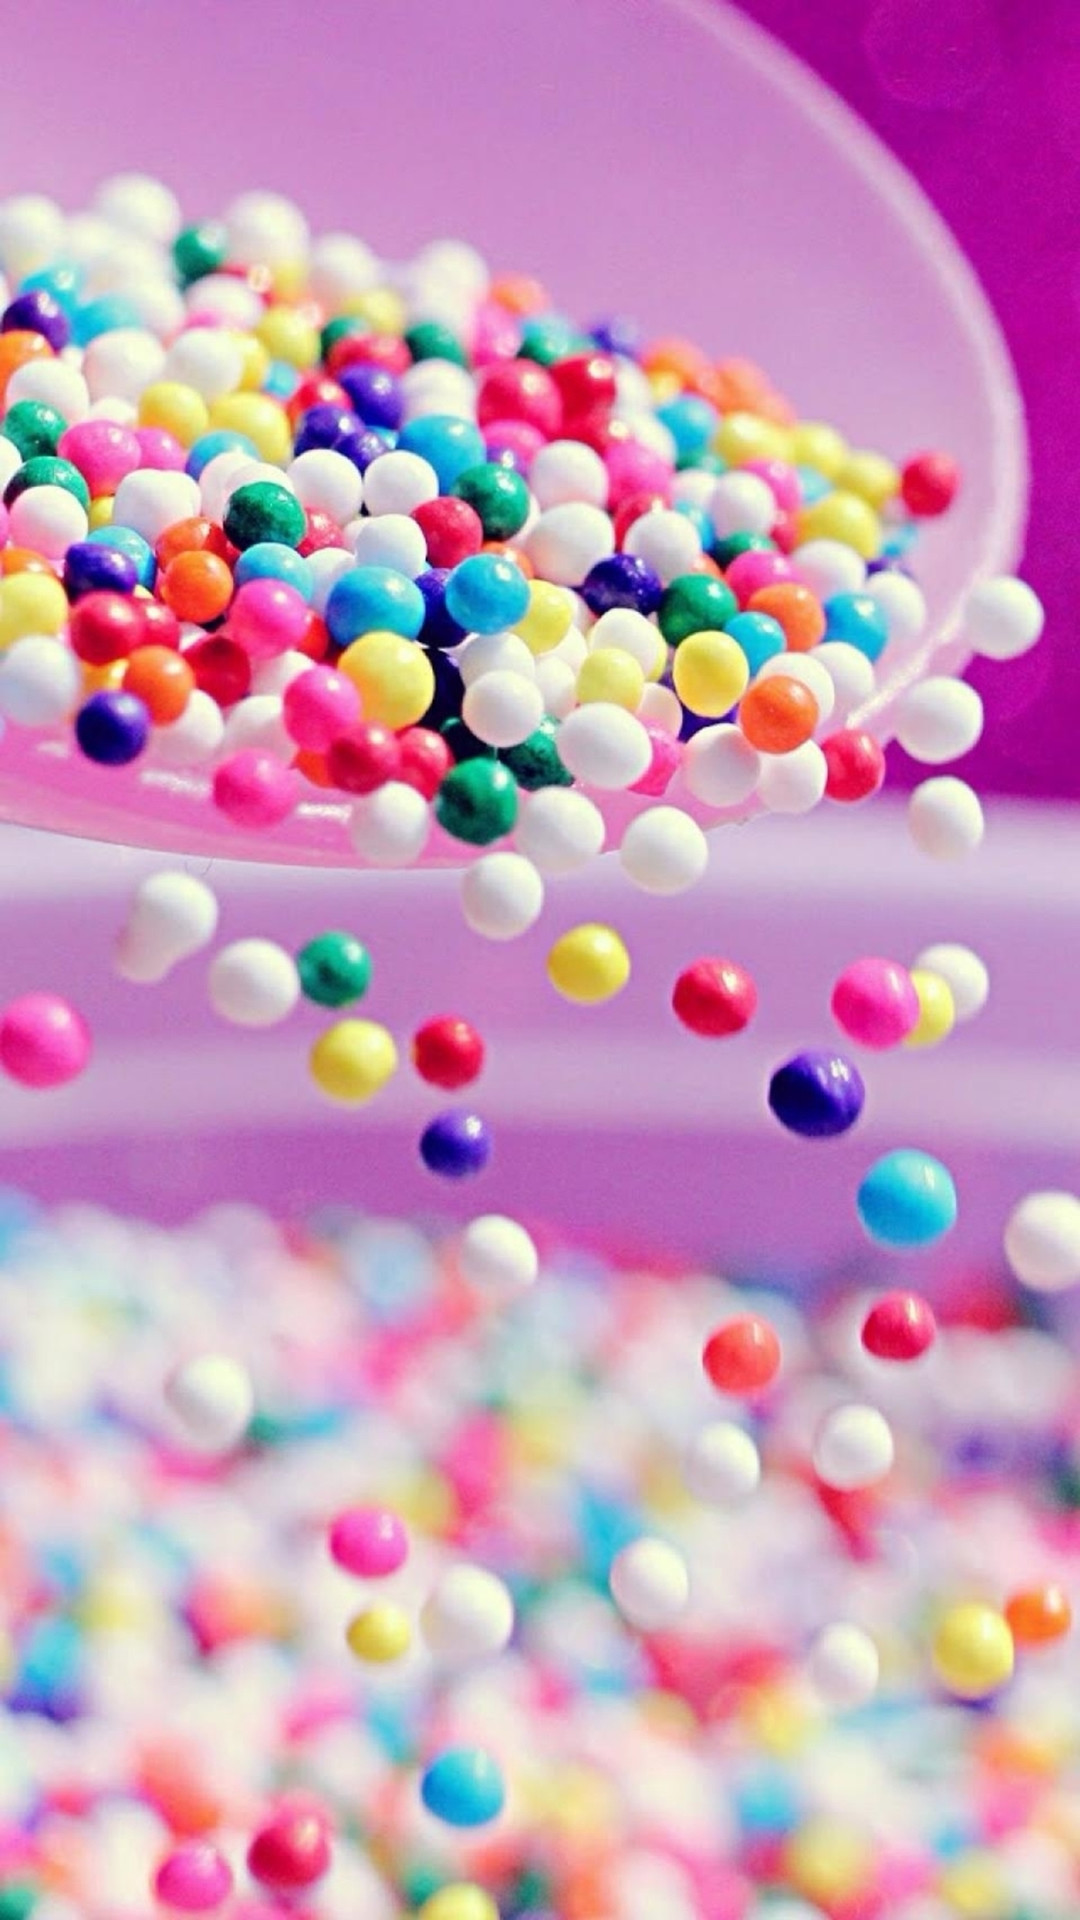 1080x1920 Sweet Colorful Candy Ball Shaking From Bowl iPhone wallpaper